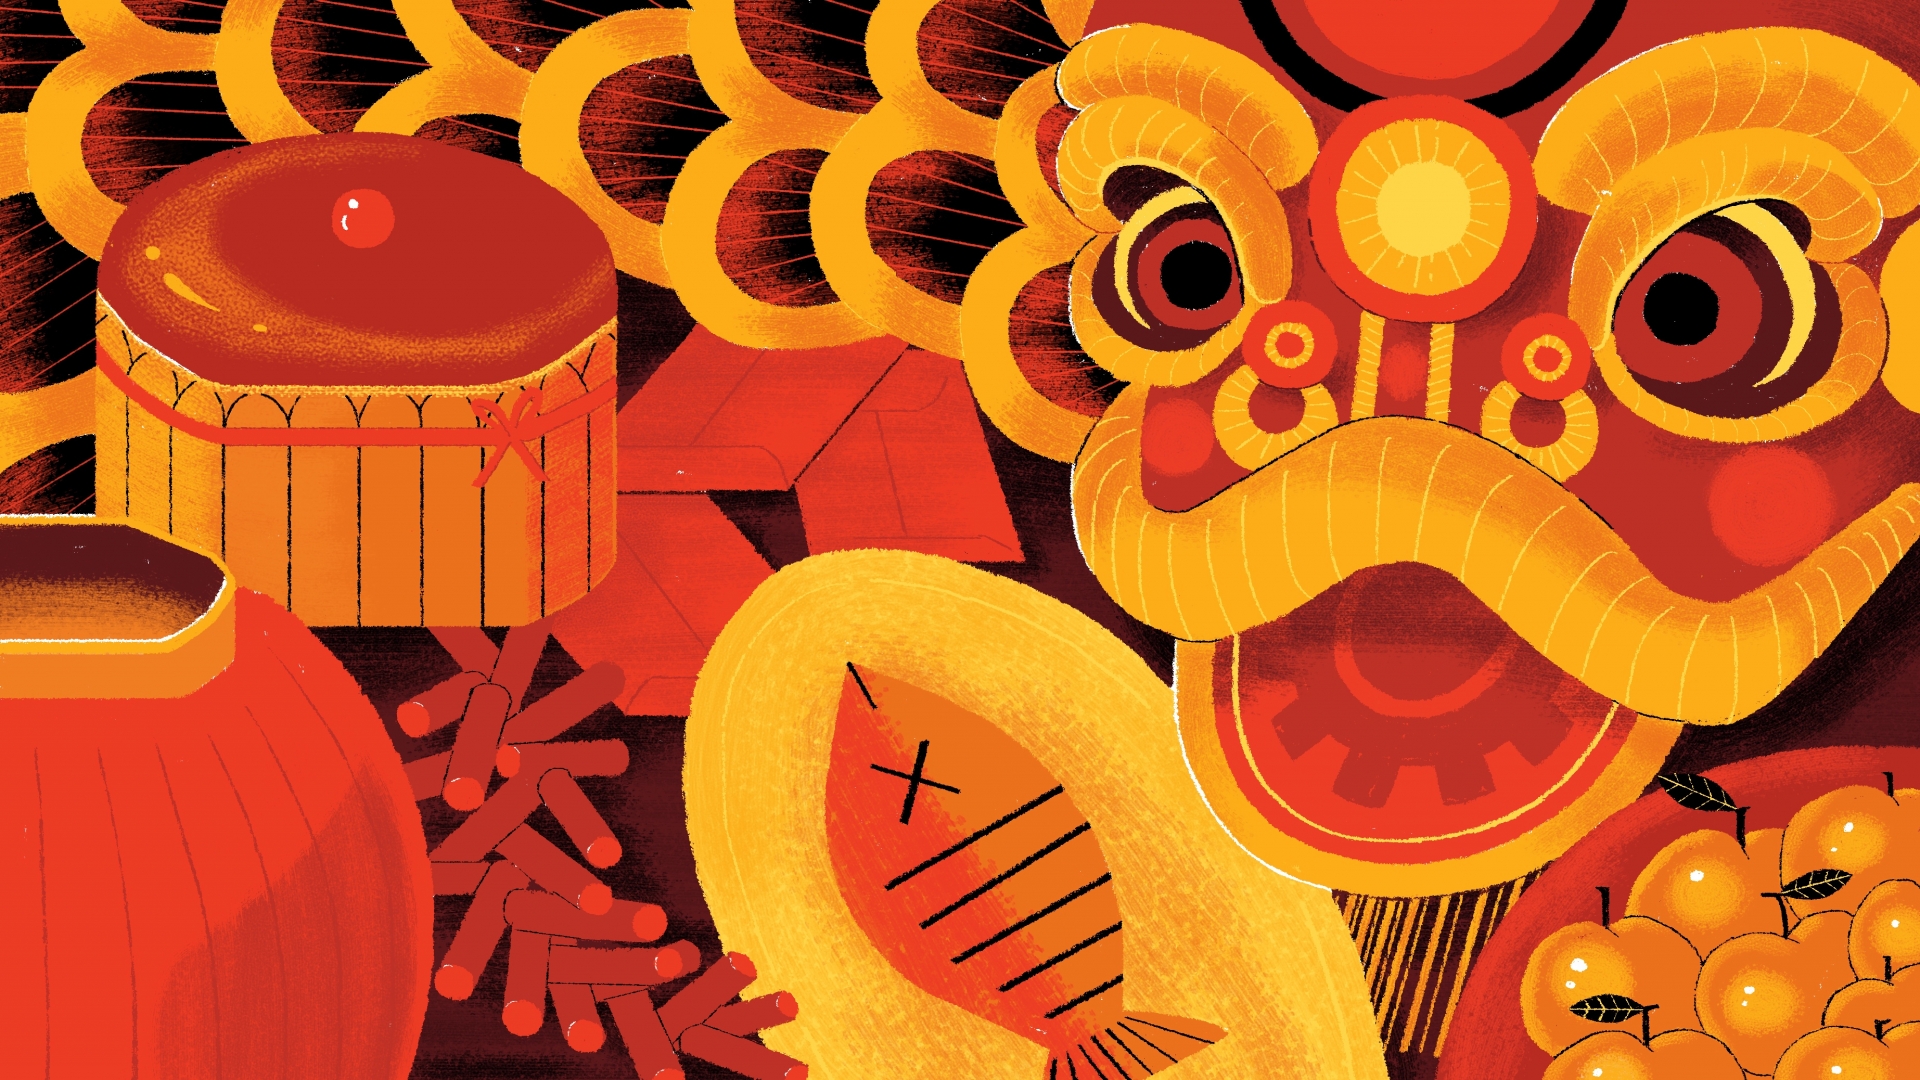 First Day of Lunar New Year: Significance, Tradition, Celebration